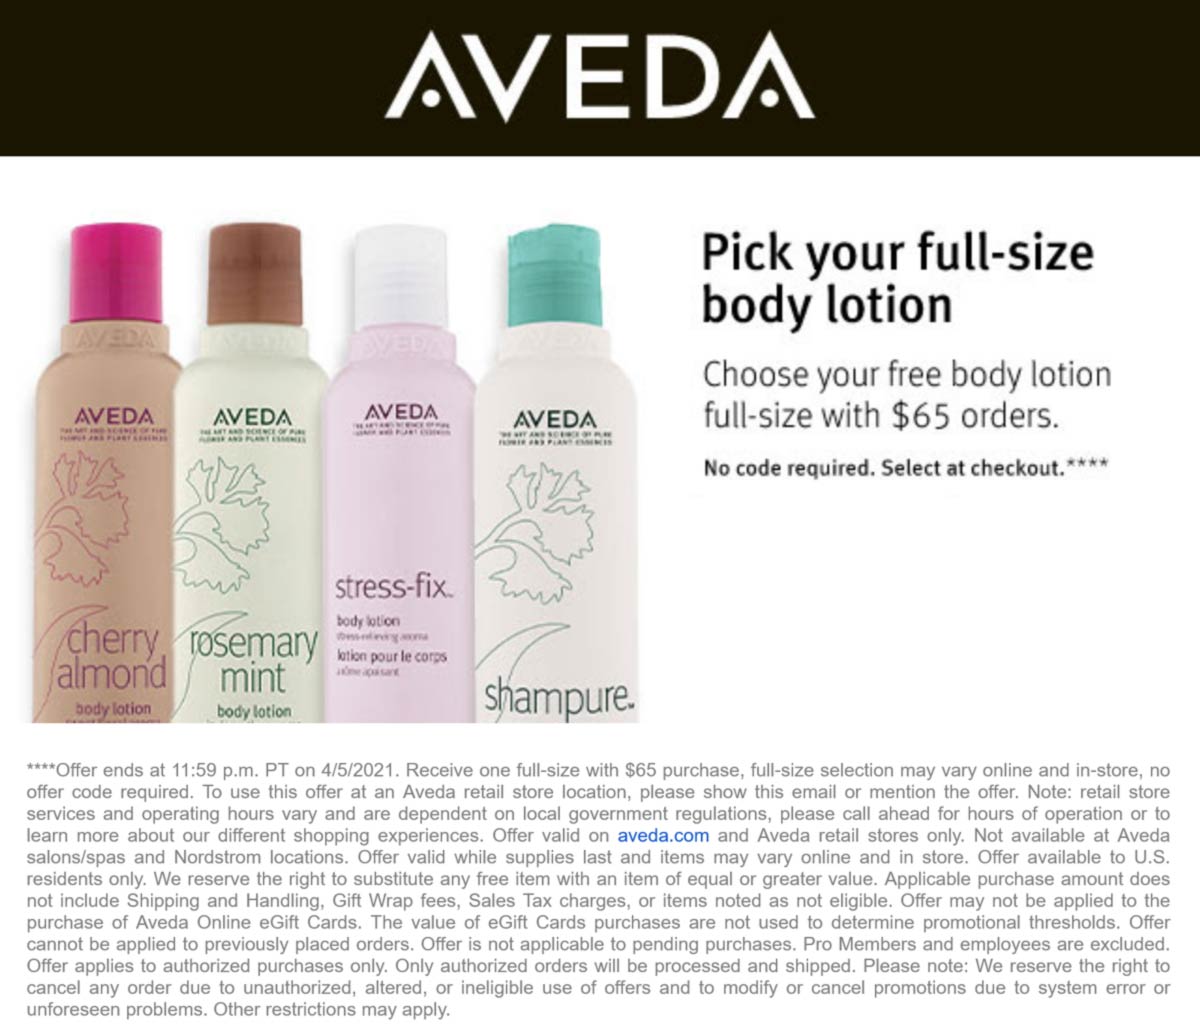 AVEDA stores Coupon  Free full size body lotion with $65 spent at AVEDA, ditto online #aveda 